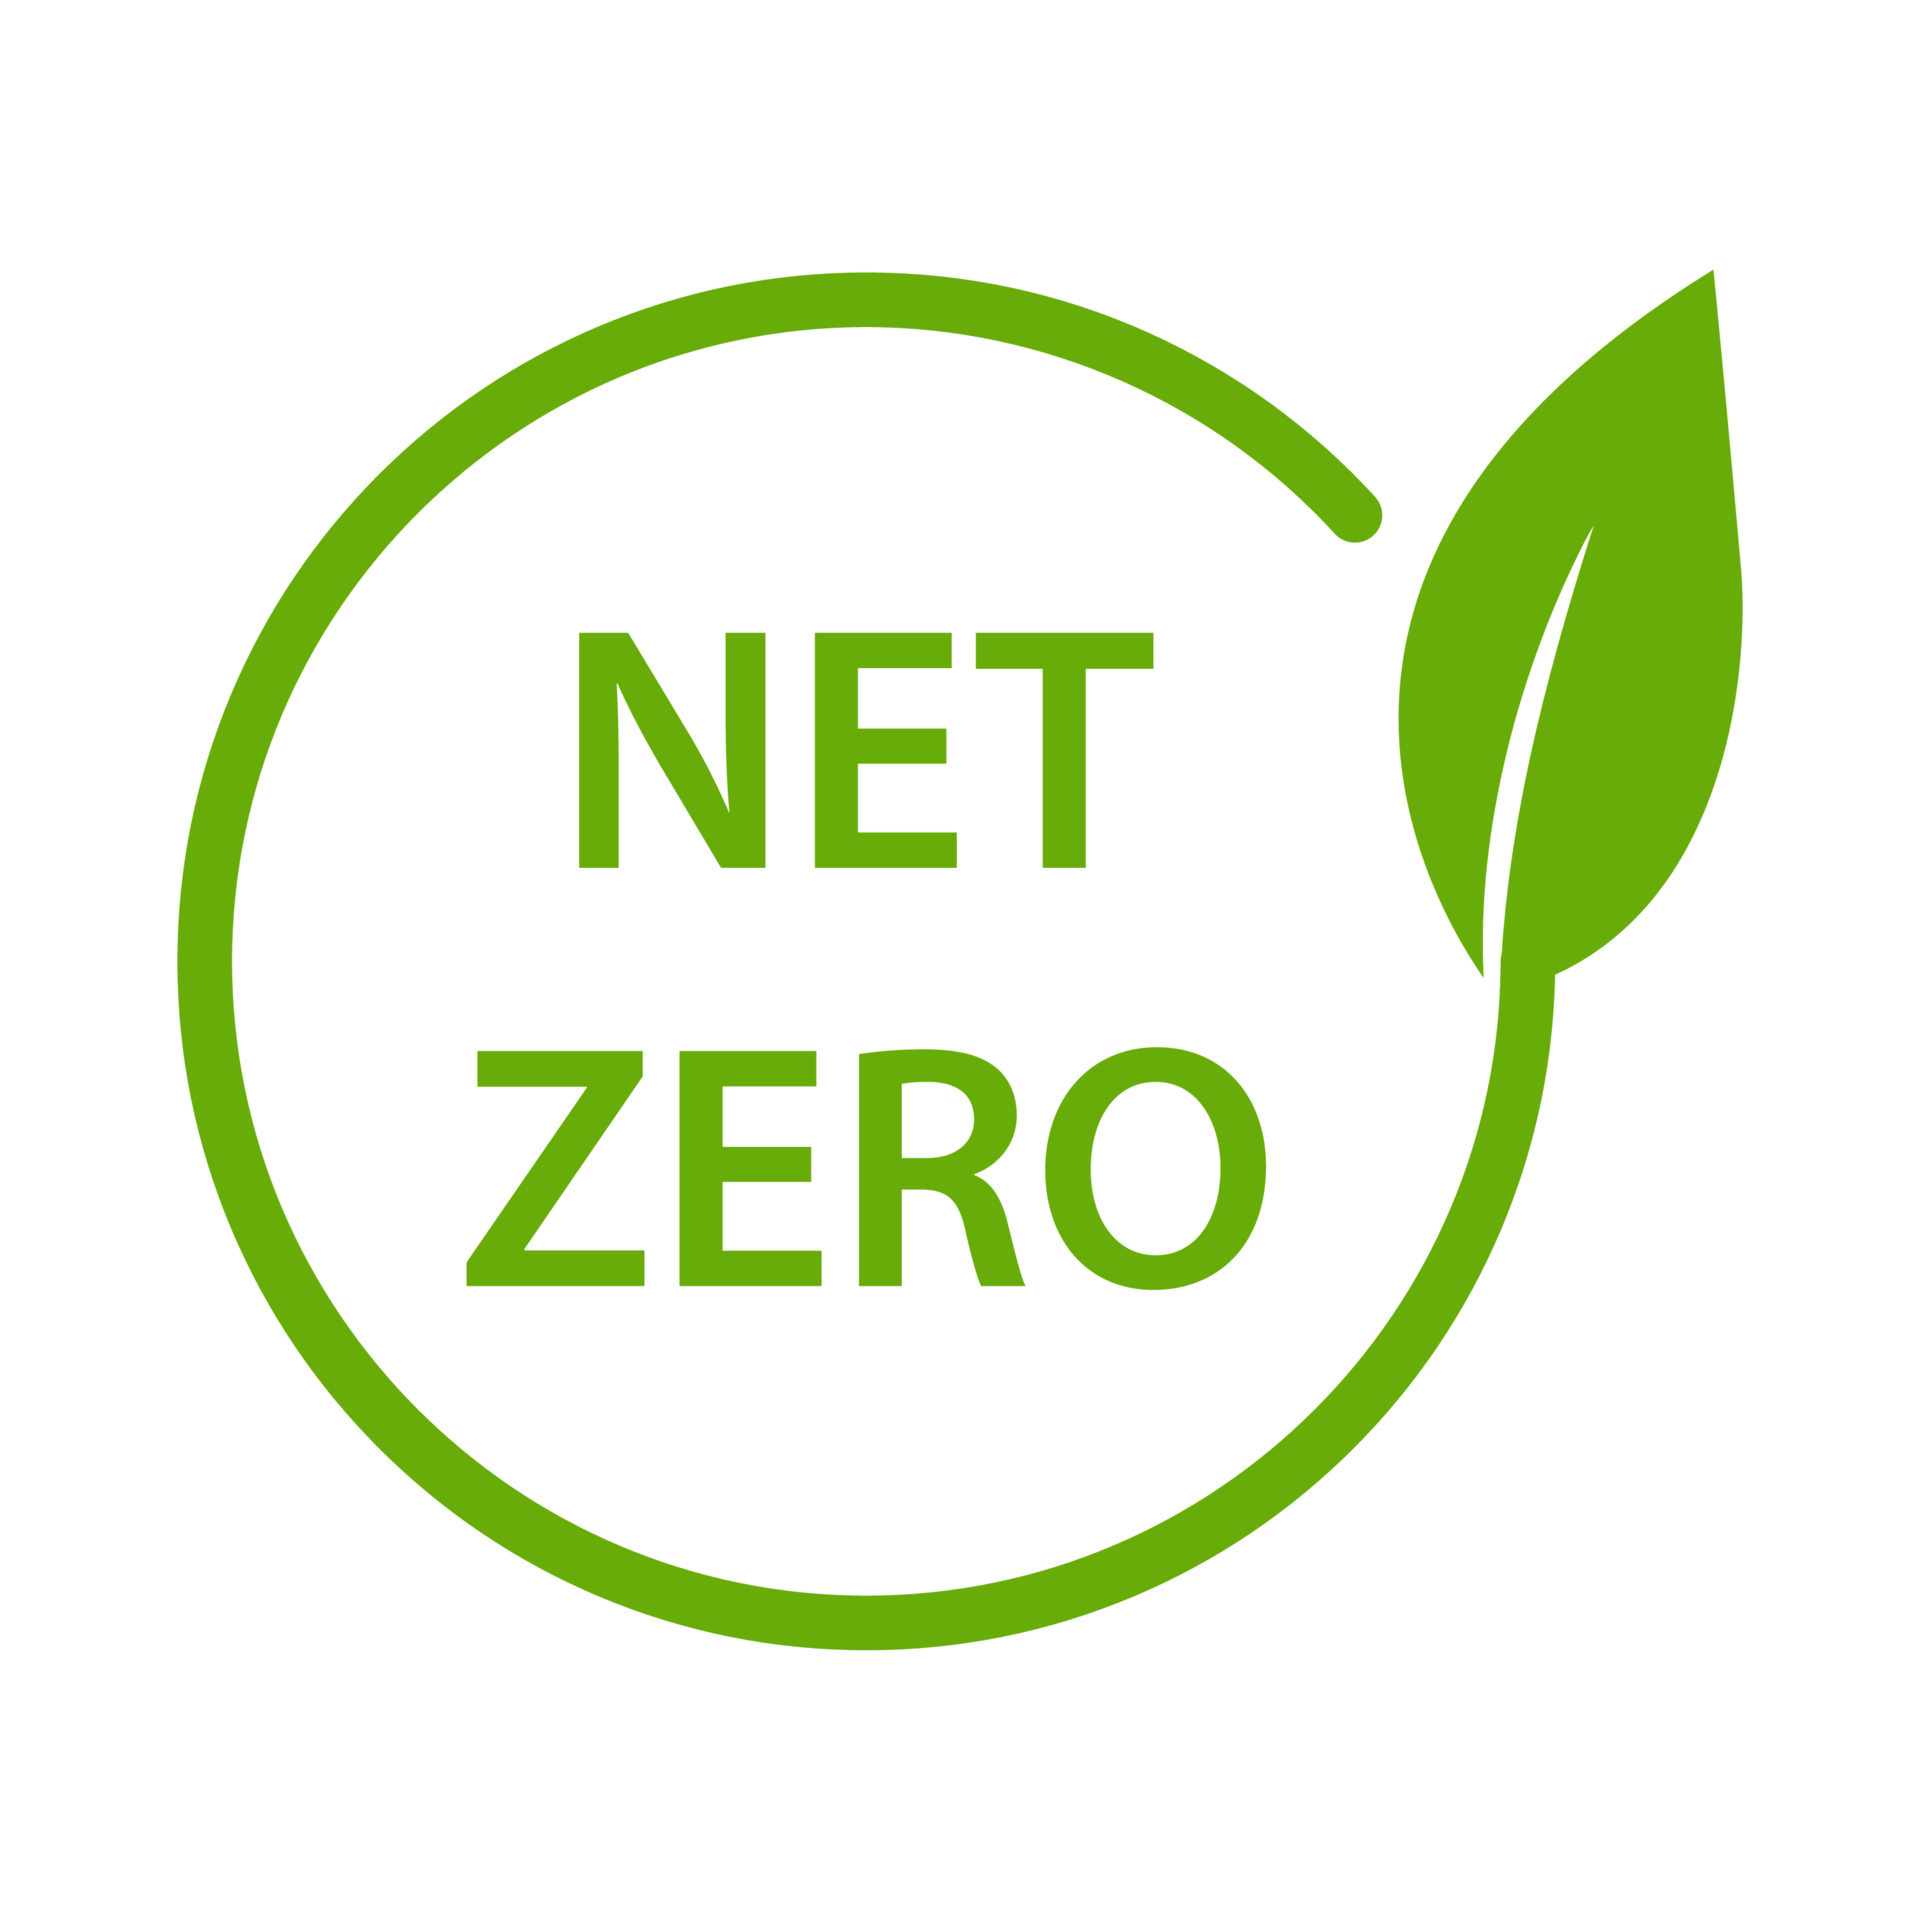 Net Zero Carbon Footprint Icon Emissions Free No Atmosphere Pollution Co2 Neutral Stamp For Graphic Design Logo Website Social Media Mobile App Ui Vector